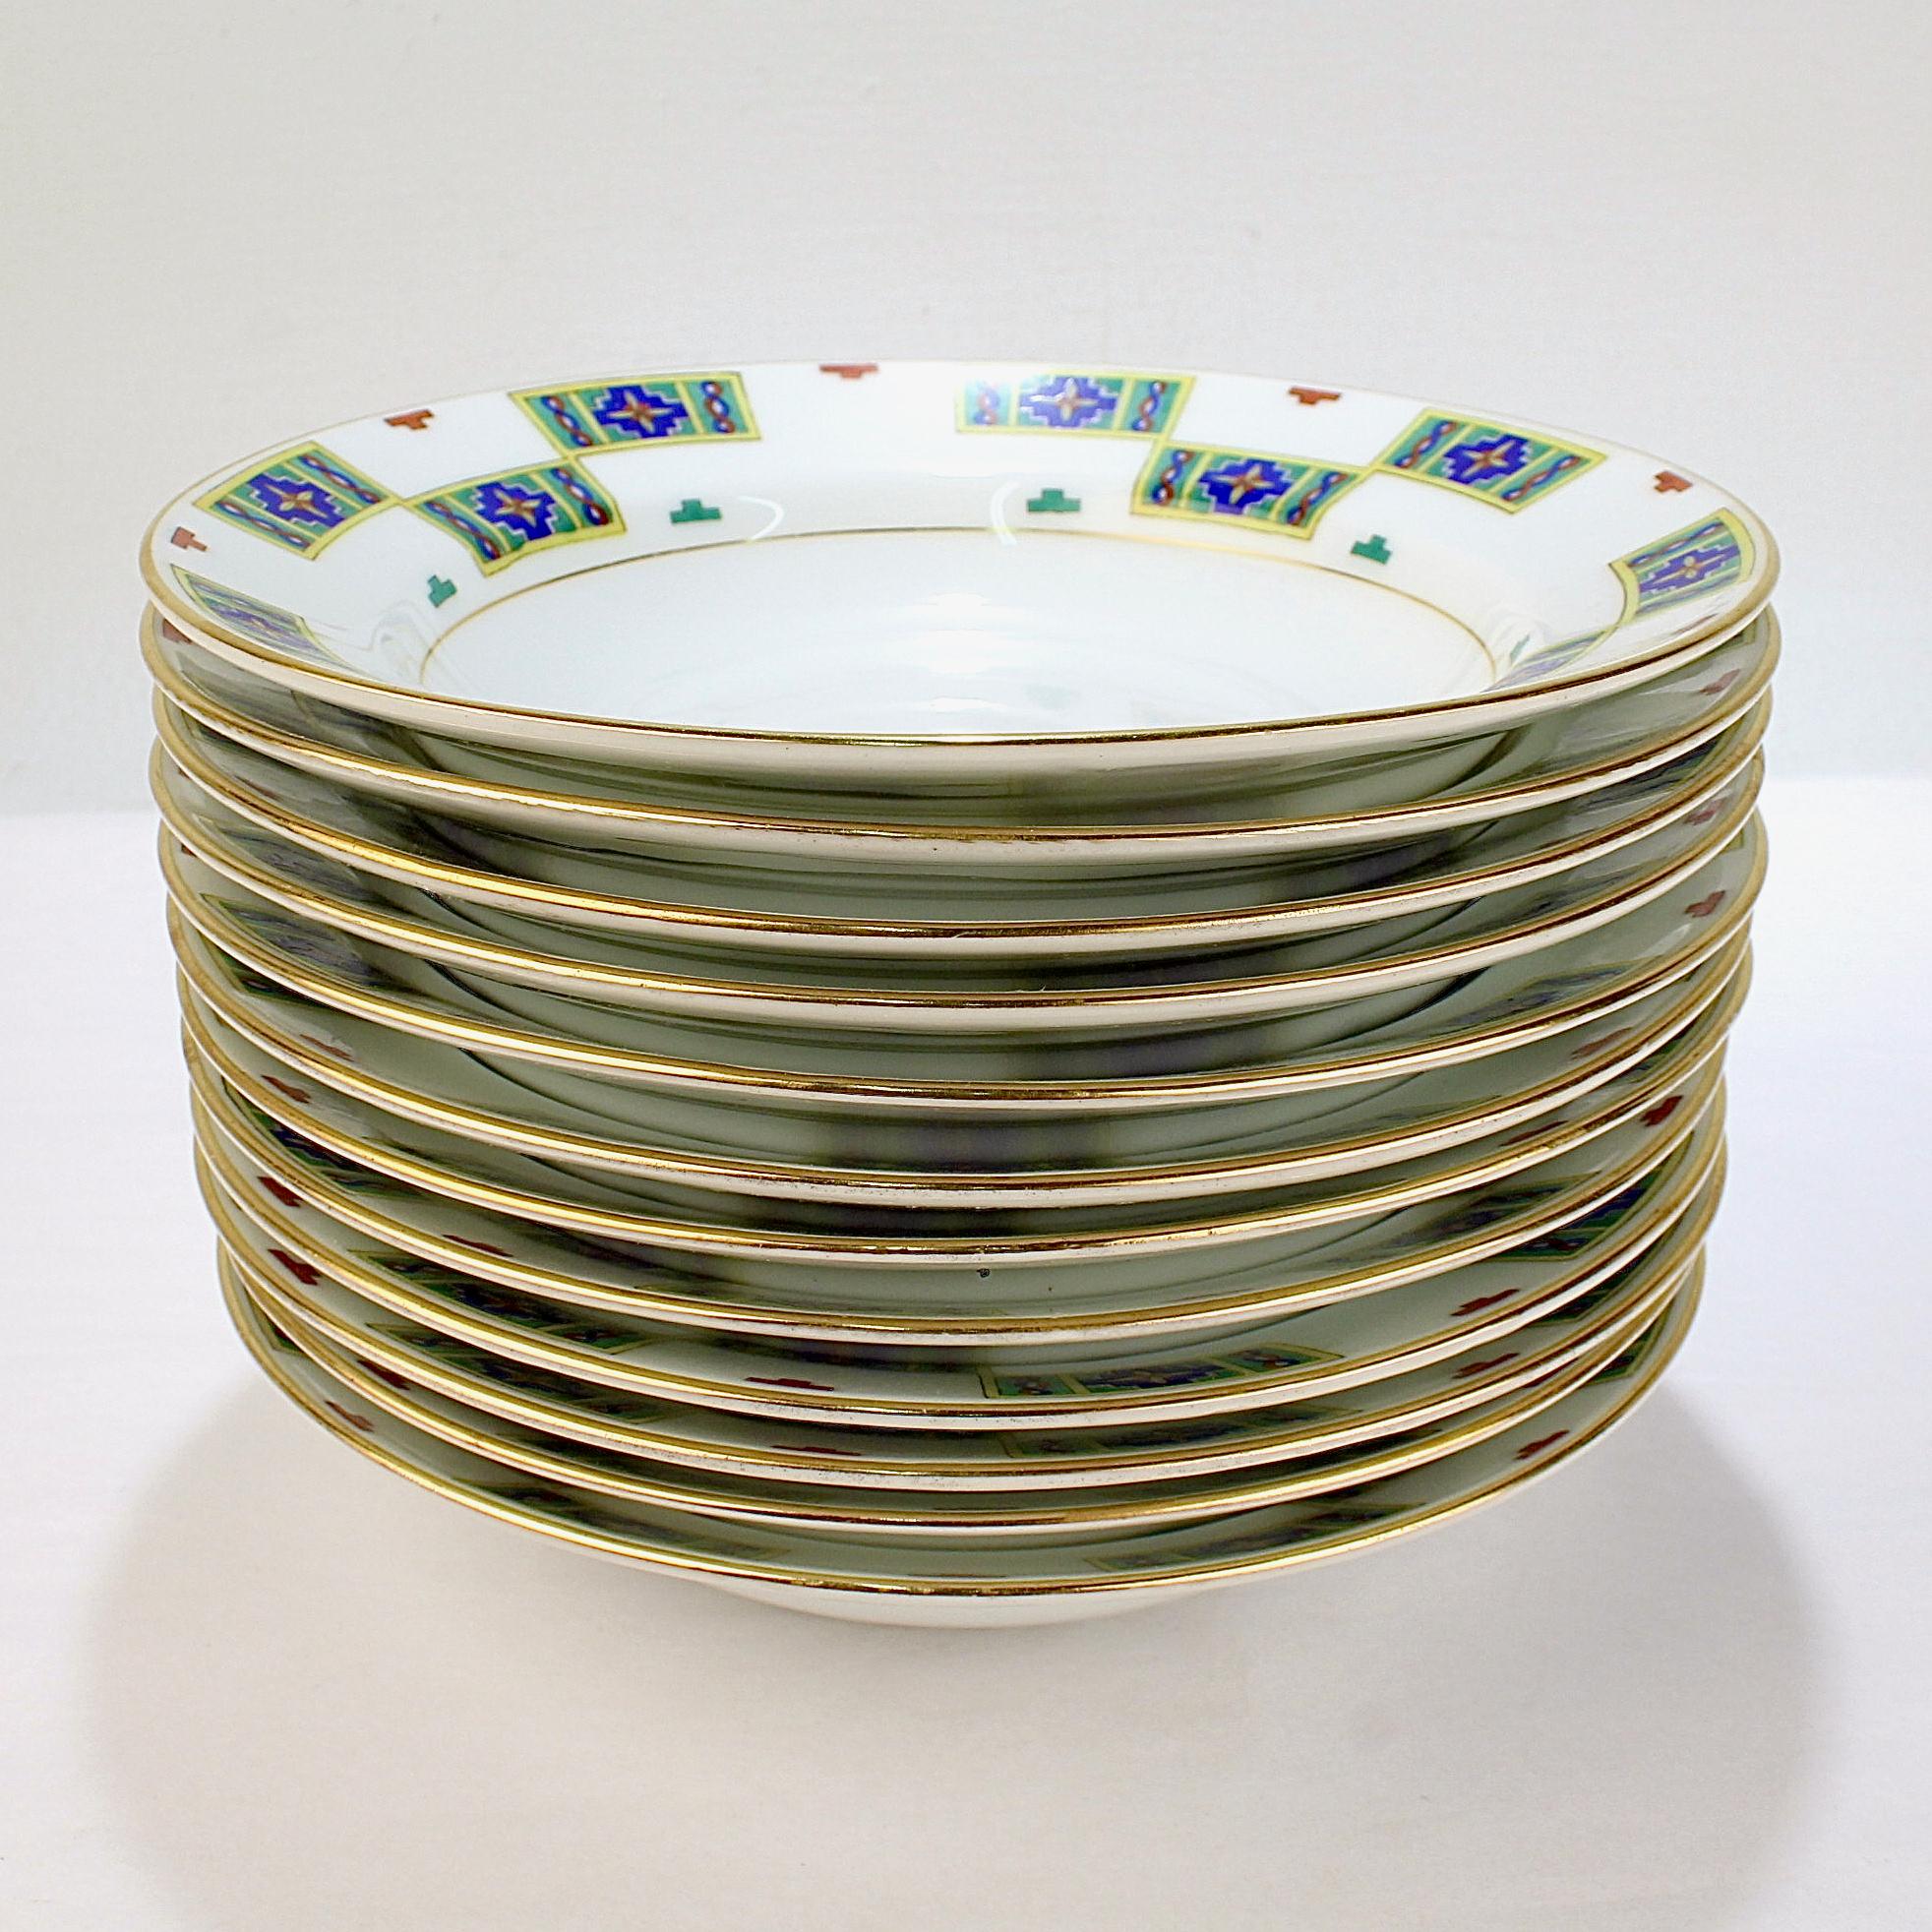 A fine complete set of 12 antique Russian porcelain soup bowls.

By the Russian porcelain manufacturer - Kornilov Brothers.

With green, yellow, blue, and red enamel decoration to the border, as well as gilt highlights.

Originally retailed by